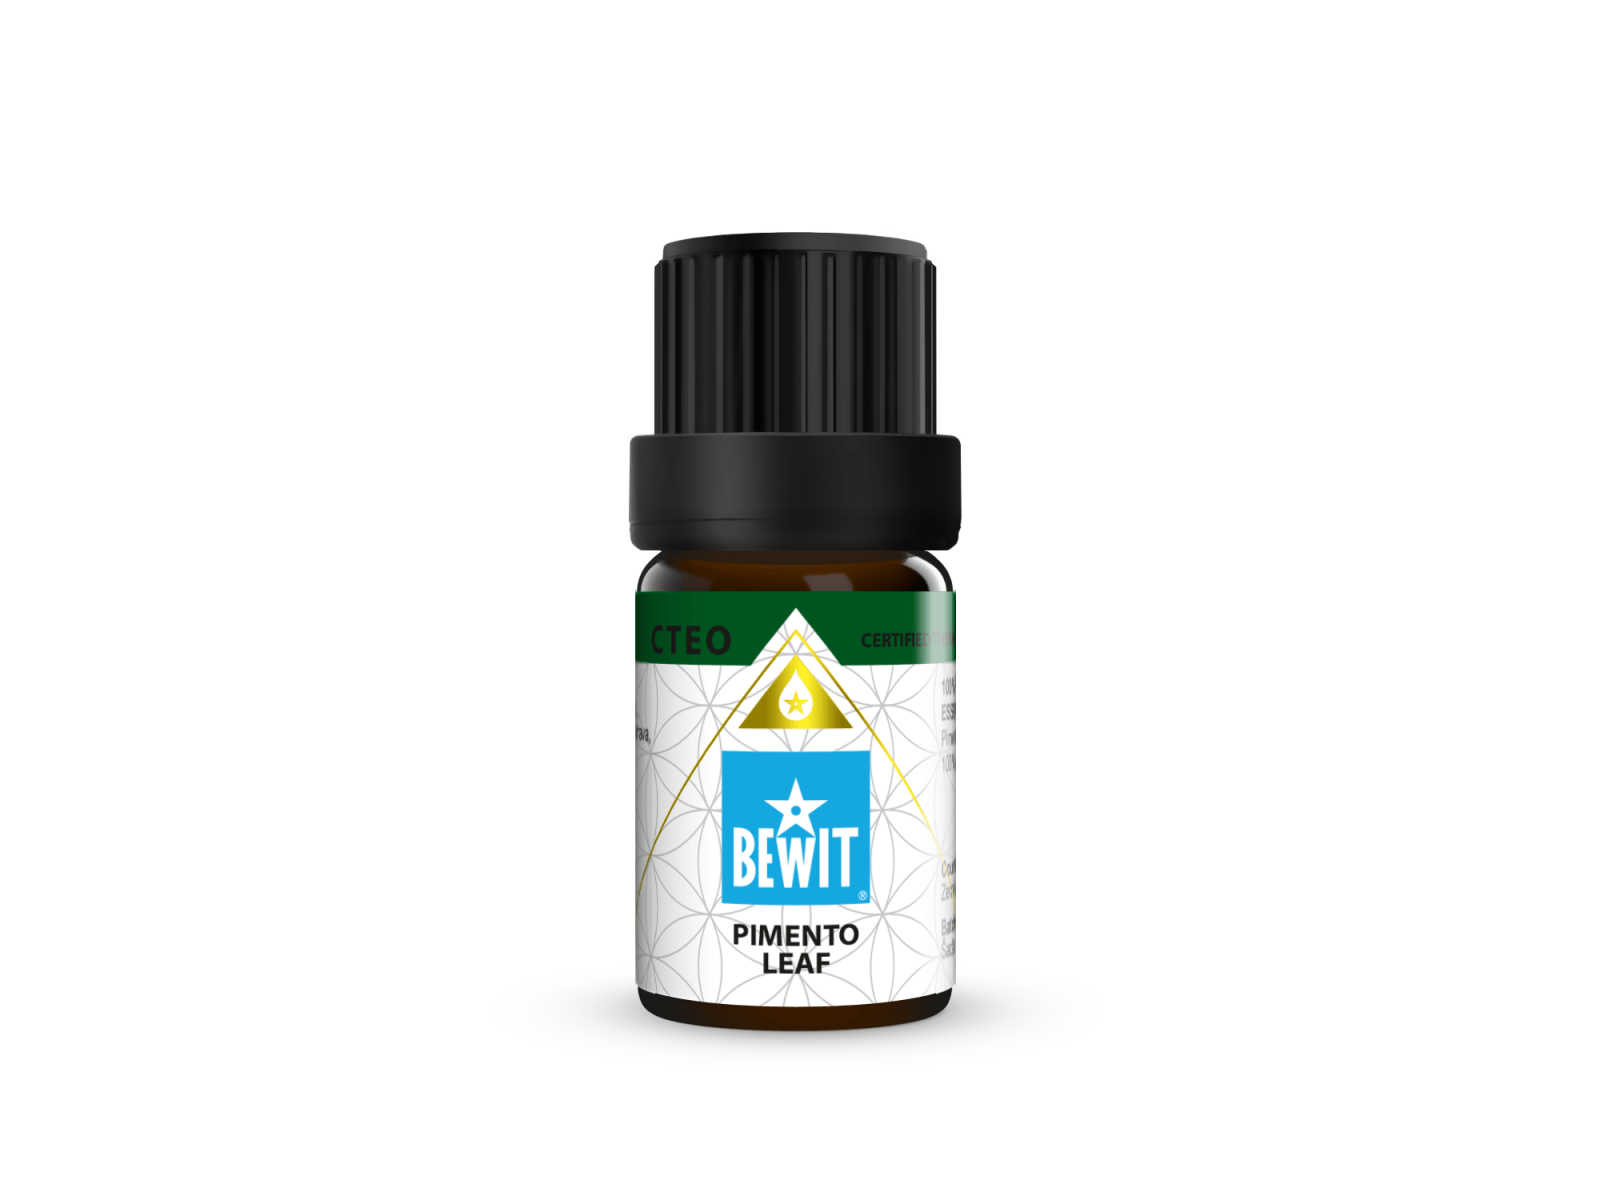 BEWIT New spices, leaf - 100% pure and natural CTEO® essential oil - 4